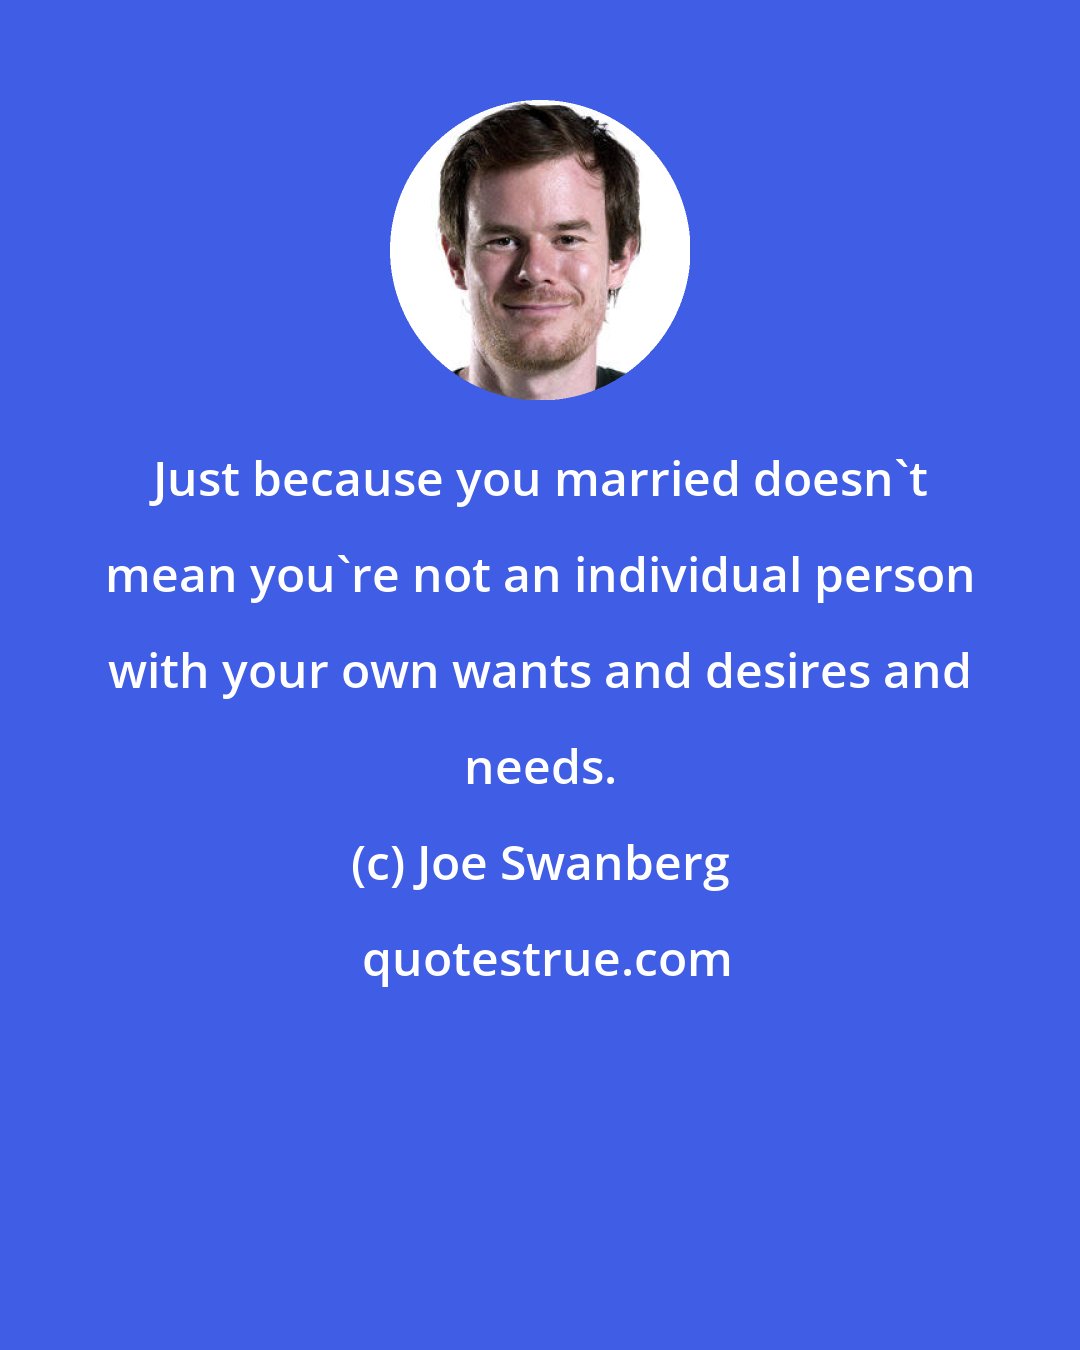 Joe Swanberg: Just because you married doesn't mean you're not an individual person with your own wants and desires and needs.